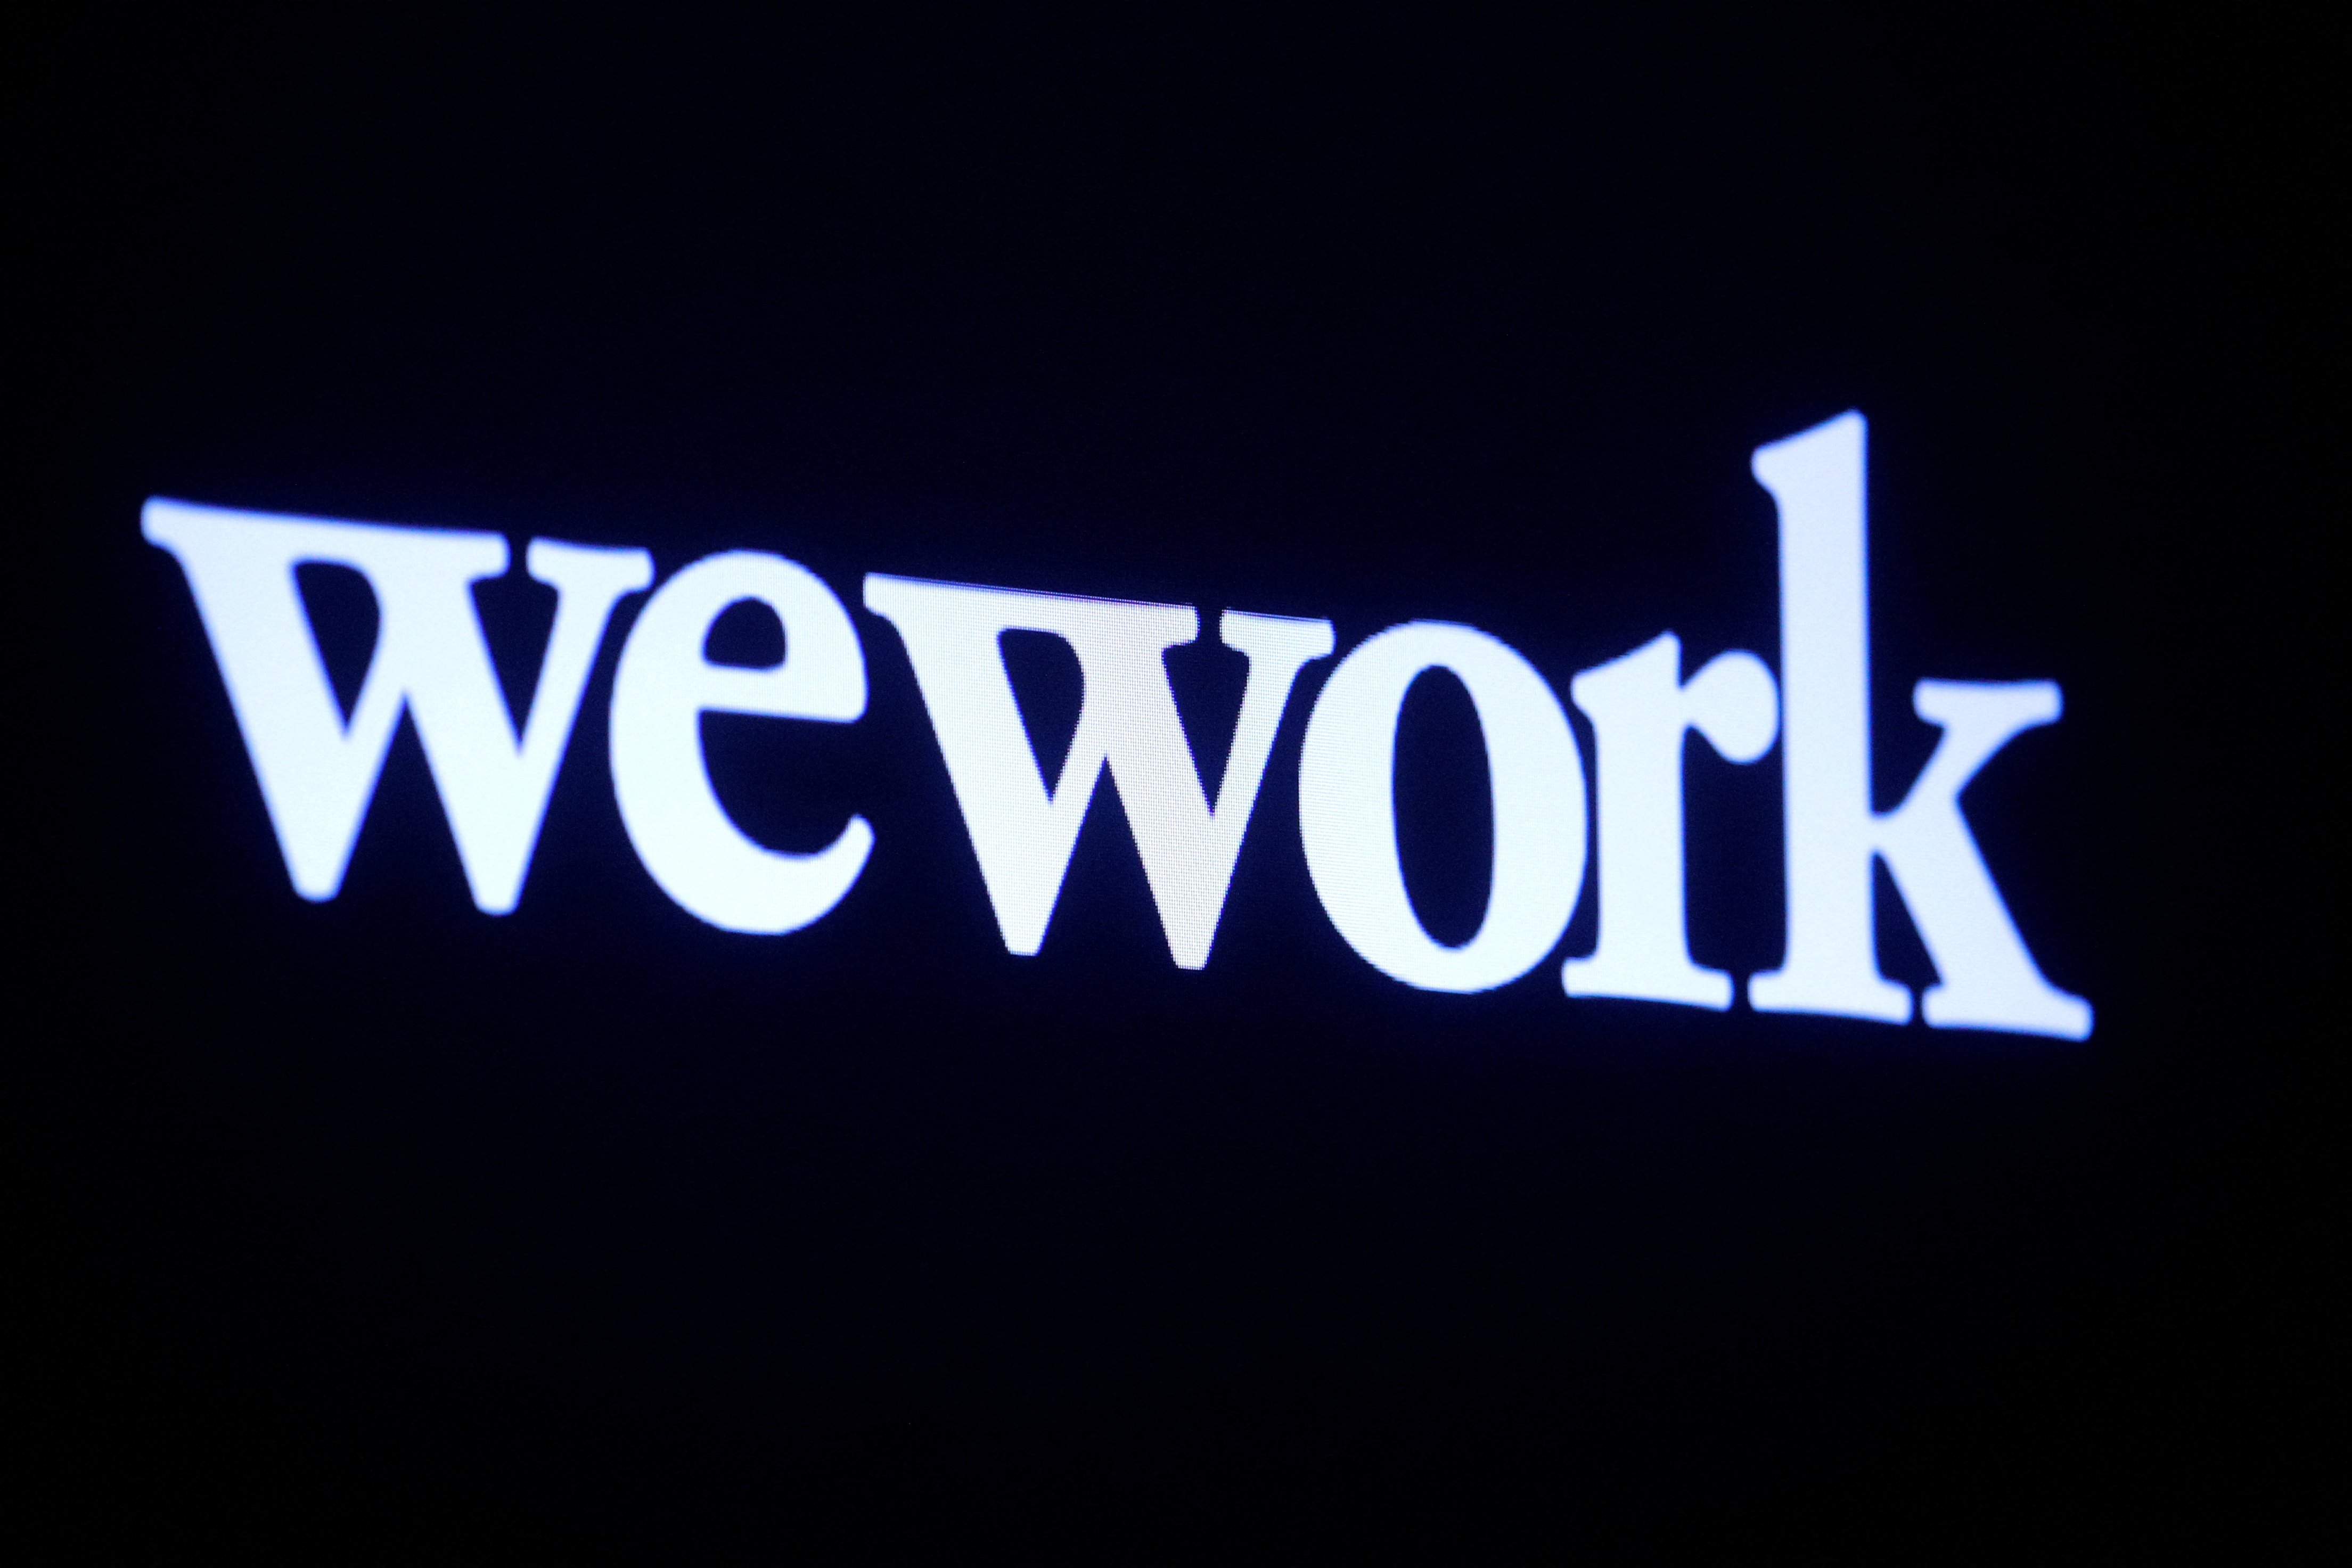 The WeWork logo is displayed on a screen during the company's IPO on the floor of the NYSE in New York